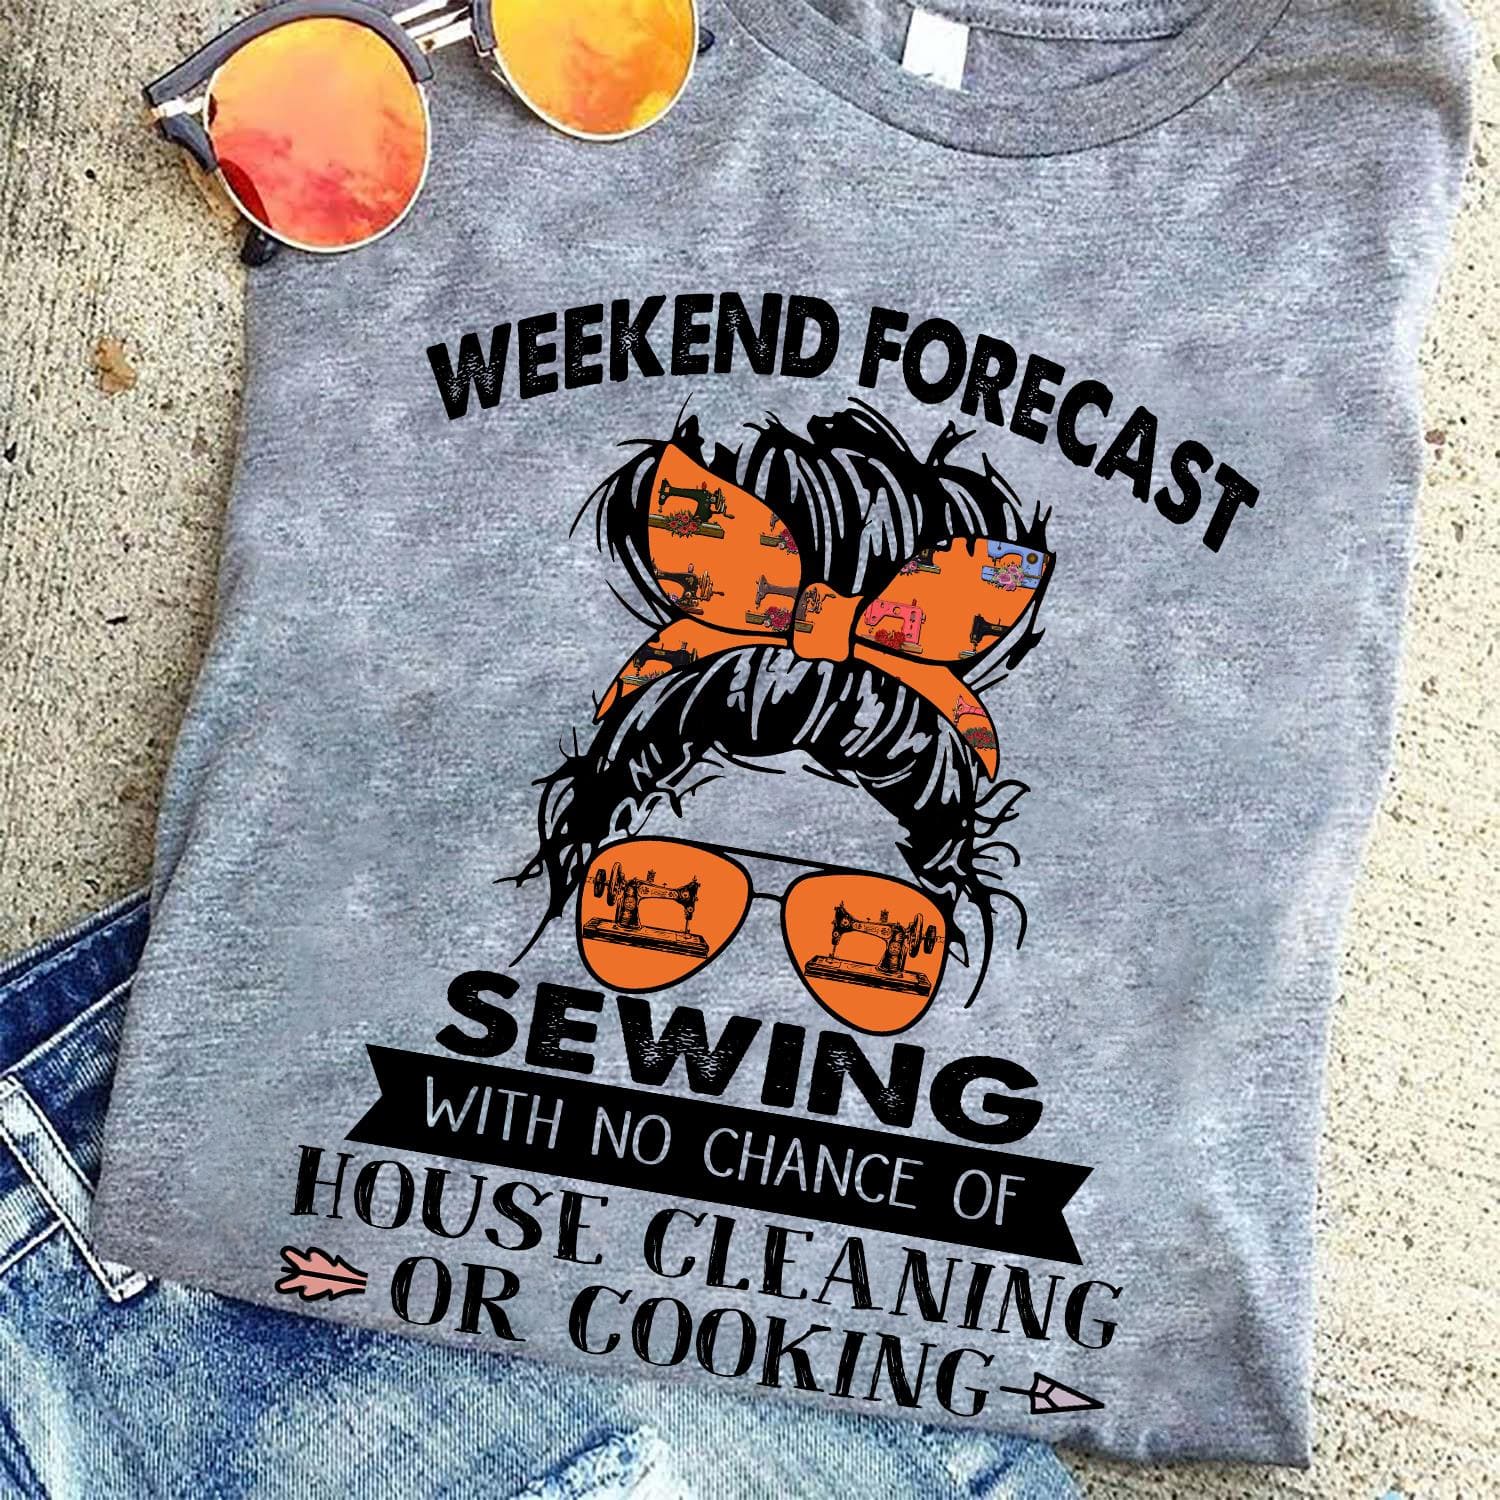 Weekend forecast sewing with no chance of house cleaning or cooking - Sewing girl T-shirt, sewing machine graphic